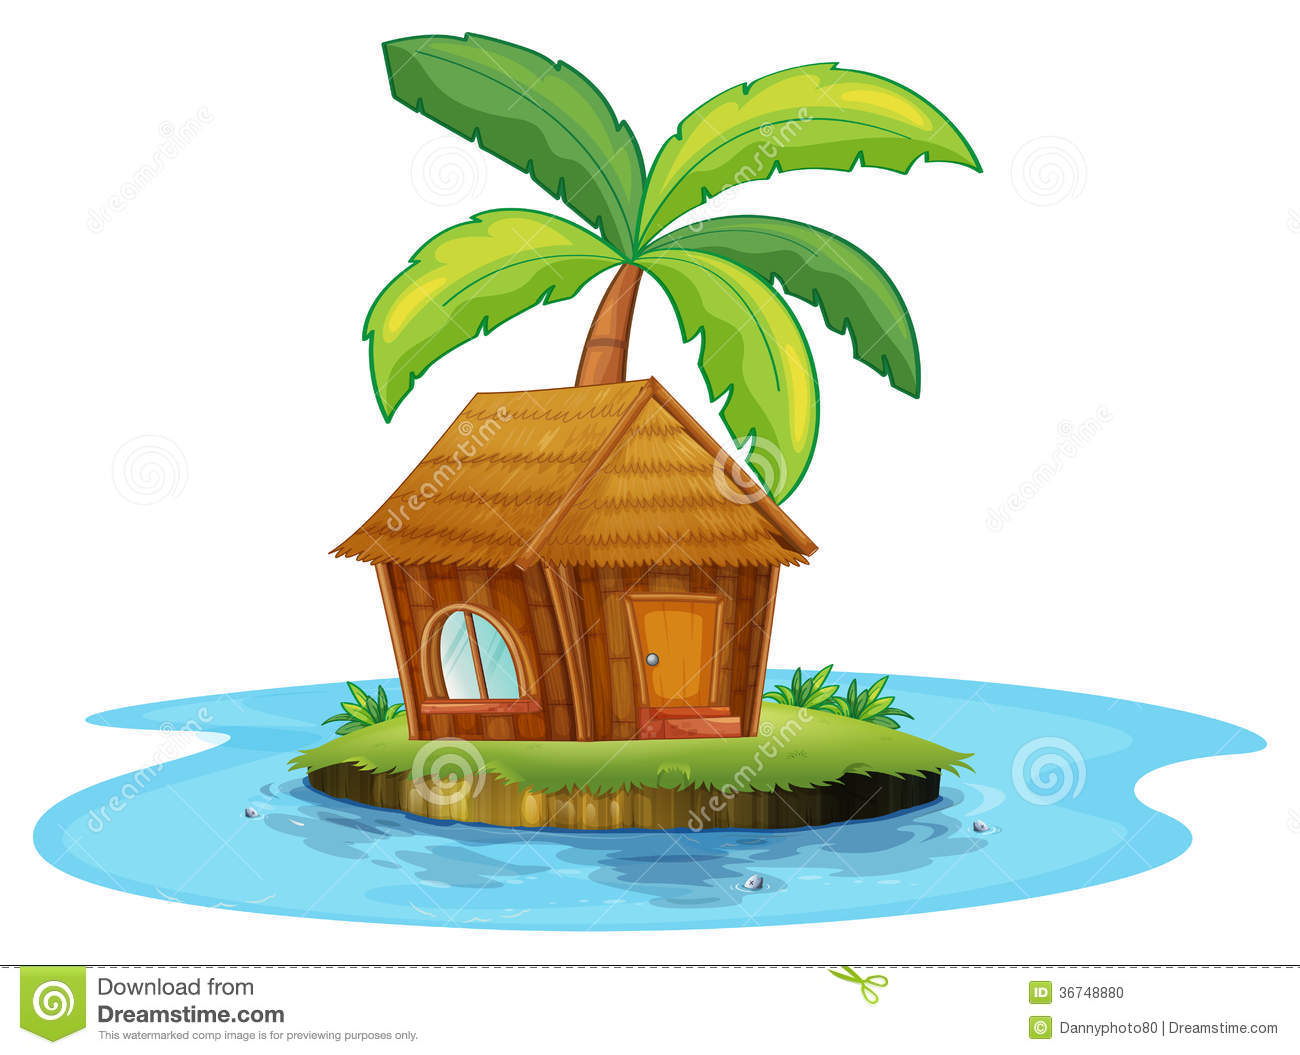 Illustration Of An Island With A Nipa Hut And A Palm Tree On A White